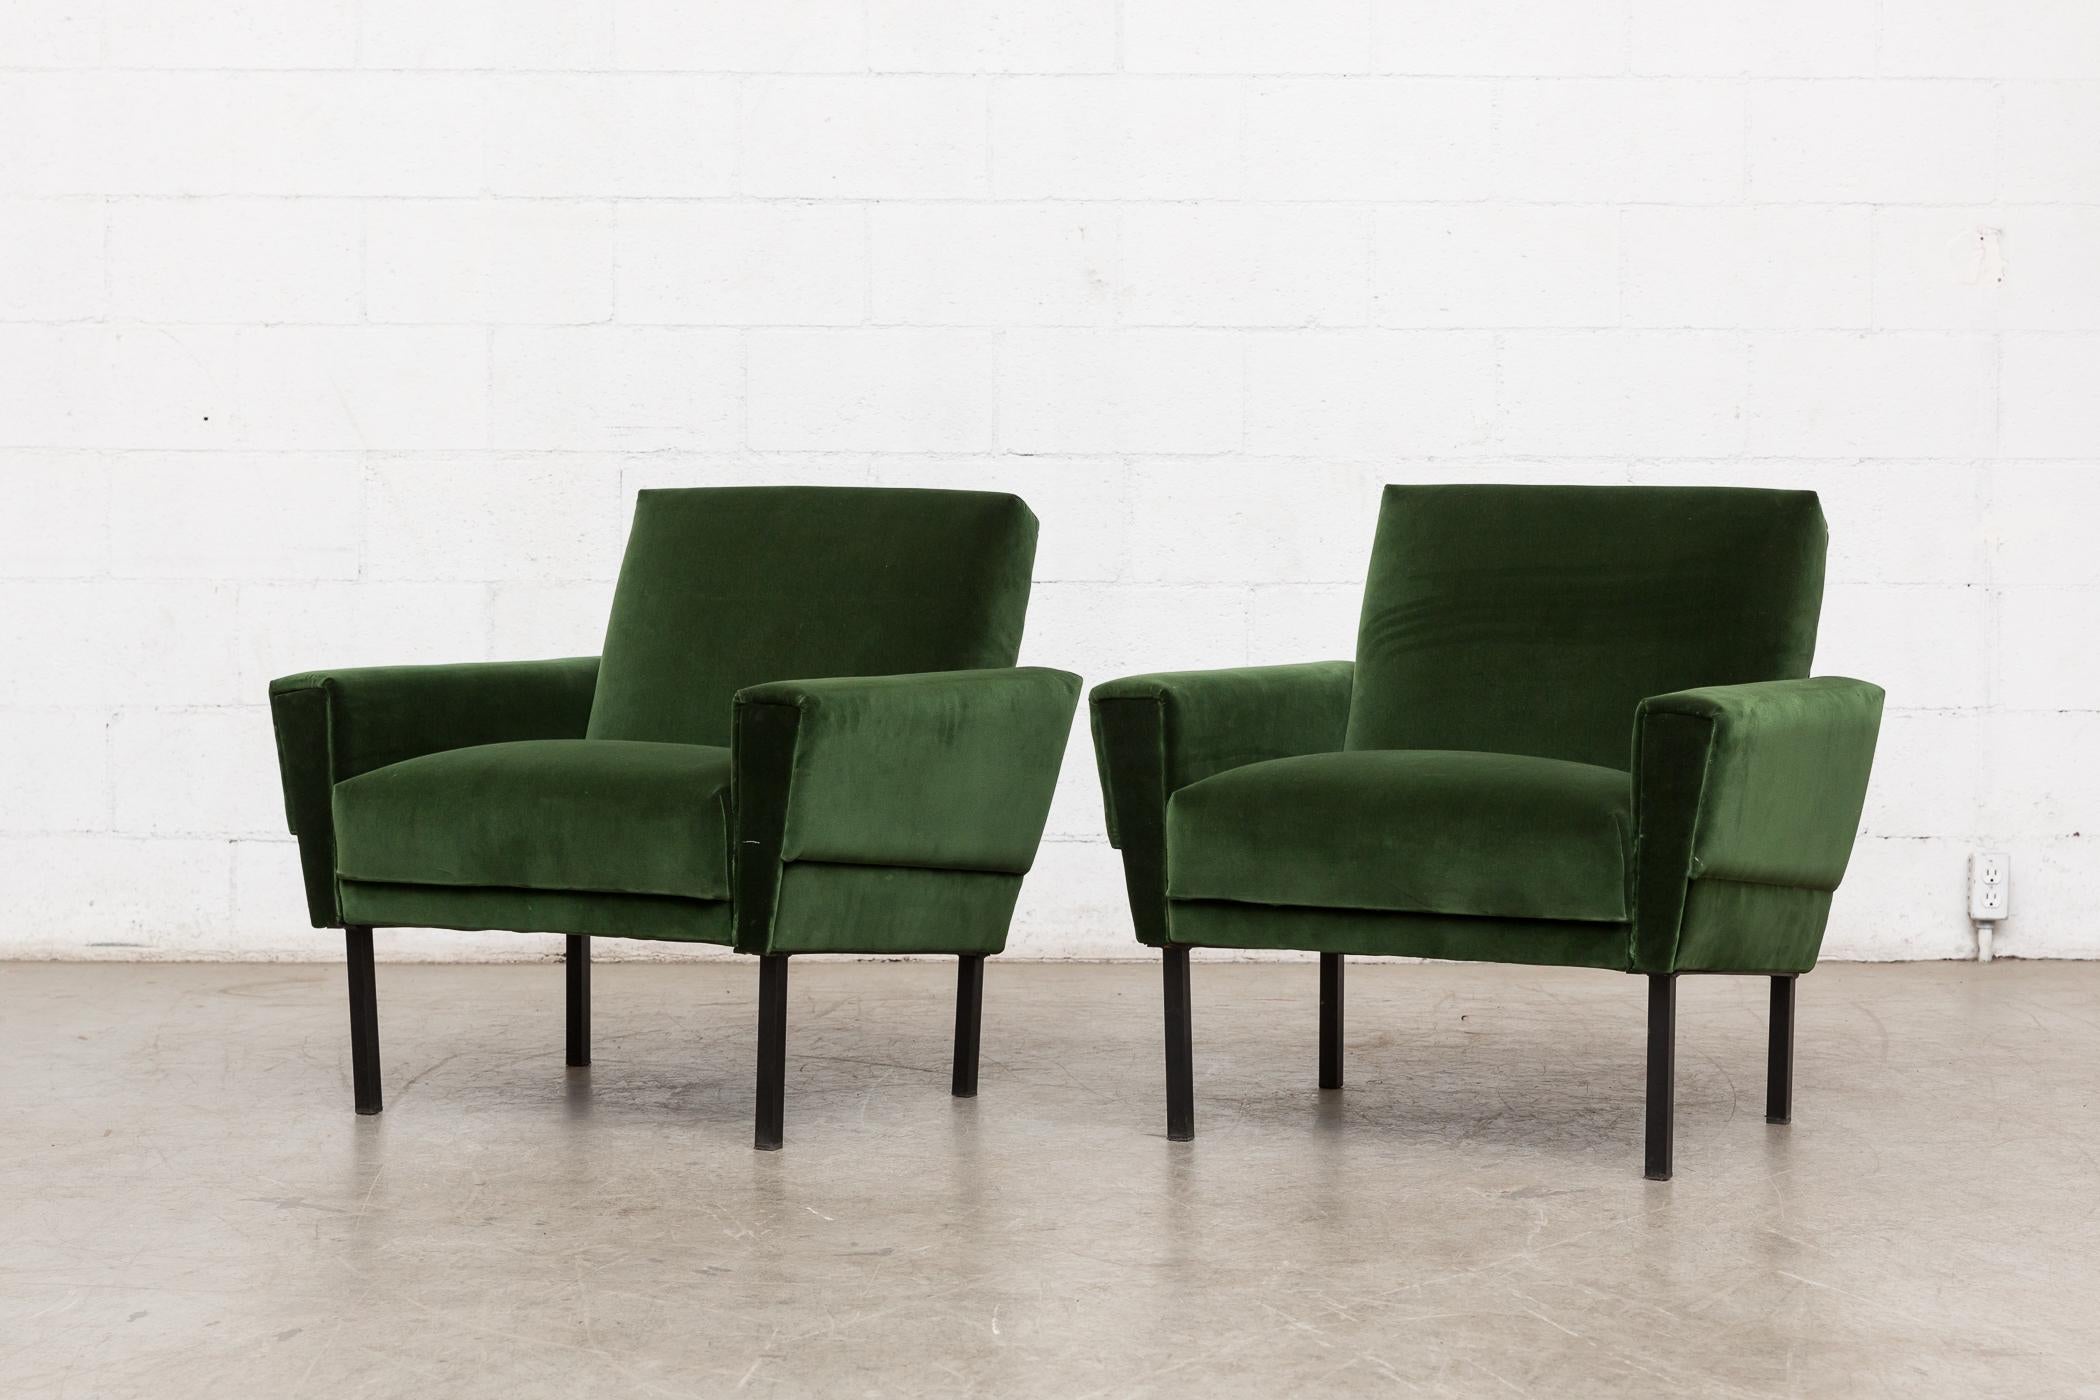 Pair of 1960s Gelderland style club chairs newly upholstered in emerald green velvet with black enameled metal legs. Legs in original condition with some wear. Set price.